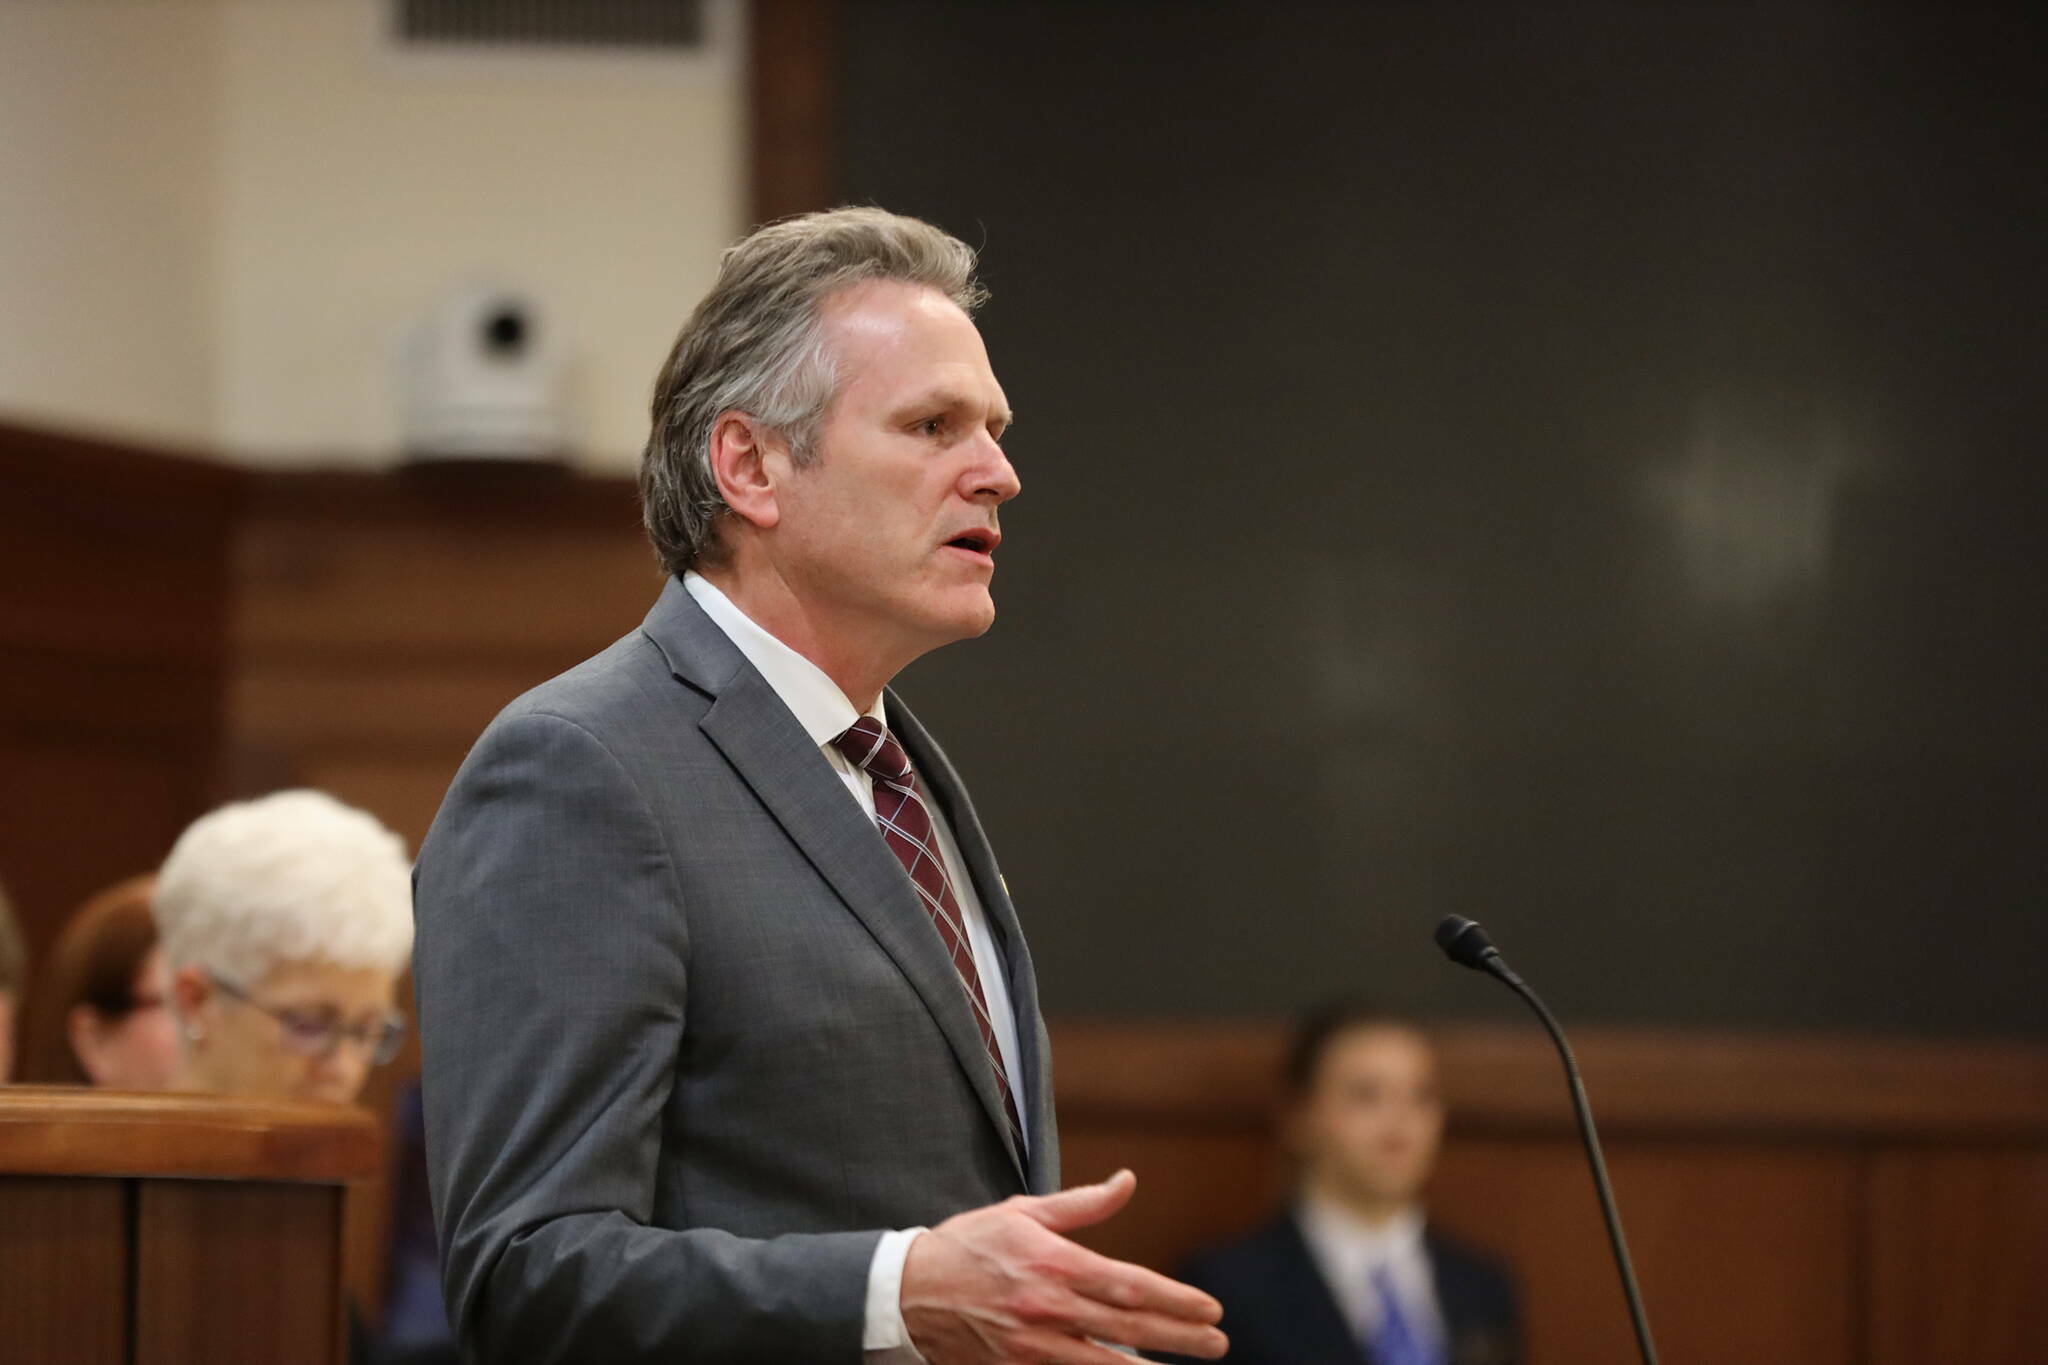 Gov. Mike Dunleavy addresses state lawmakers and guests attending his State of the State speech on Jan. 23, 2023. (Clarise Larson / Juneau Empire file photo)